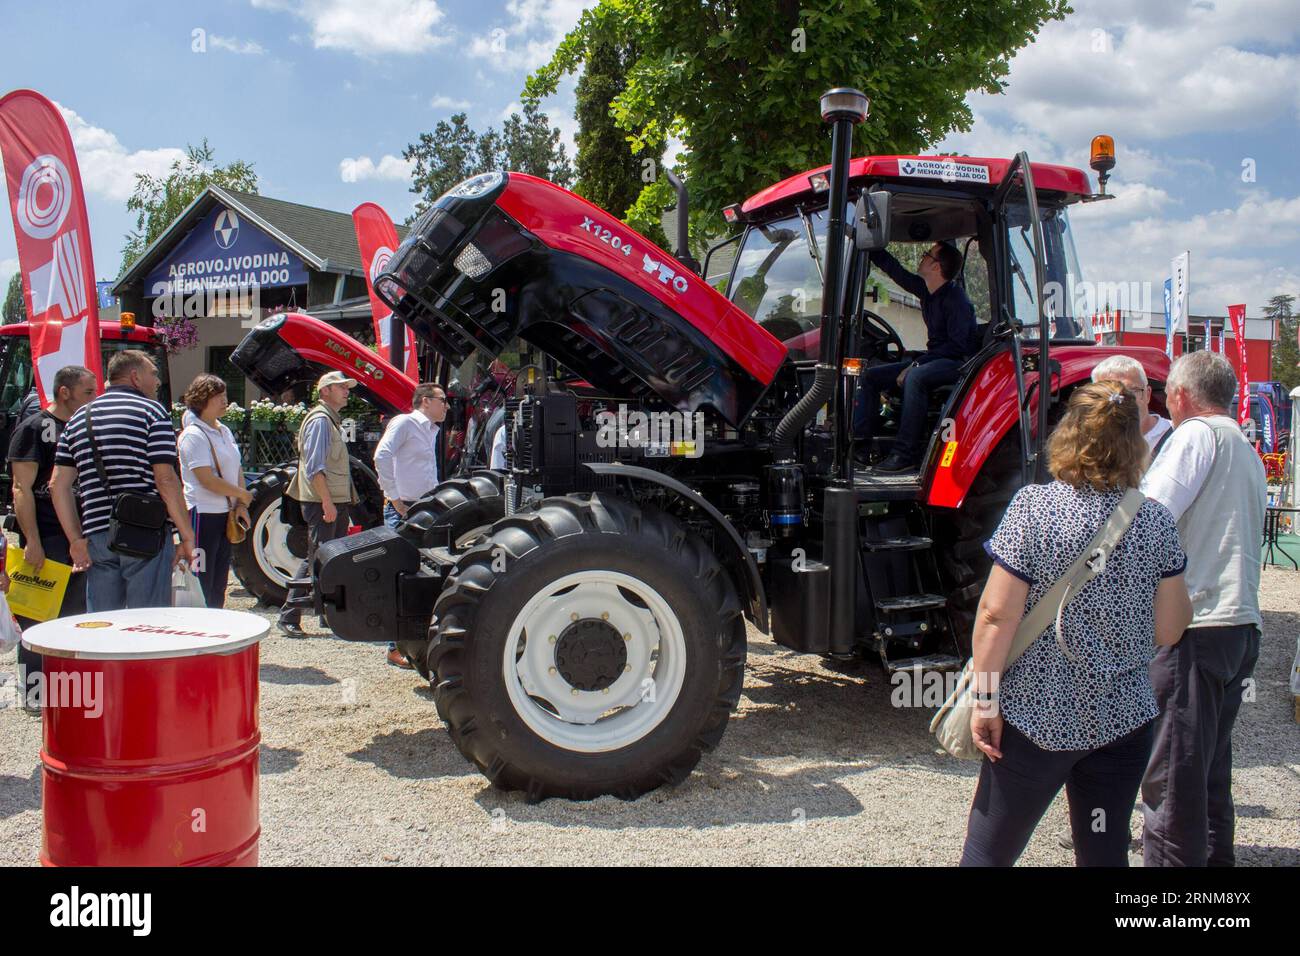 https://c8.alamy.com/comp/2RNM8YX/170517-novi-sad-may-17-2017-visitors-look-at-tractors-of-chinese-company-yto-at-the-premium-agricultural-brands-of-china-in-serbia-2017-exhibition-part-of-the-international-agriculture-fair-in-novi-sad-north-serbia-may-16-2017-more-than-40-chinese-companies-showed-products-at-the-agriculture-exhibition-opened-on-tuesday-zw-serbia-novi-sad-china-agriculture-exhibition-nemanjaxcabric-publicationxnotxinxchn-novi-sad-may-17-2017-visitors-look-at-tractors-of-chinese-company-yto-at-the-premium-agricultural-brands-of-china-in-serbia-2017-exhibition-part-of-the-international-ag-2RNM8YX.jpg